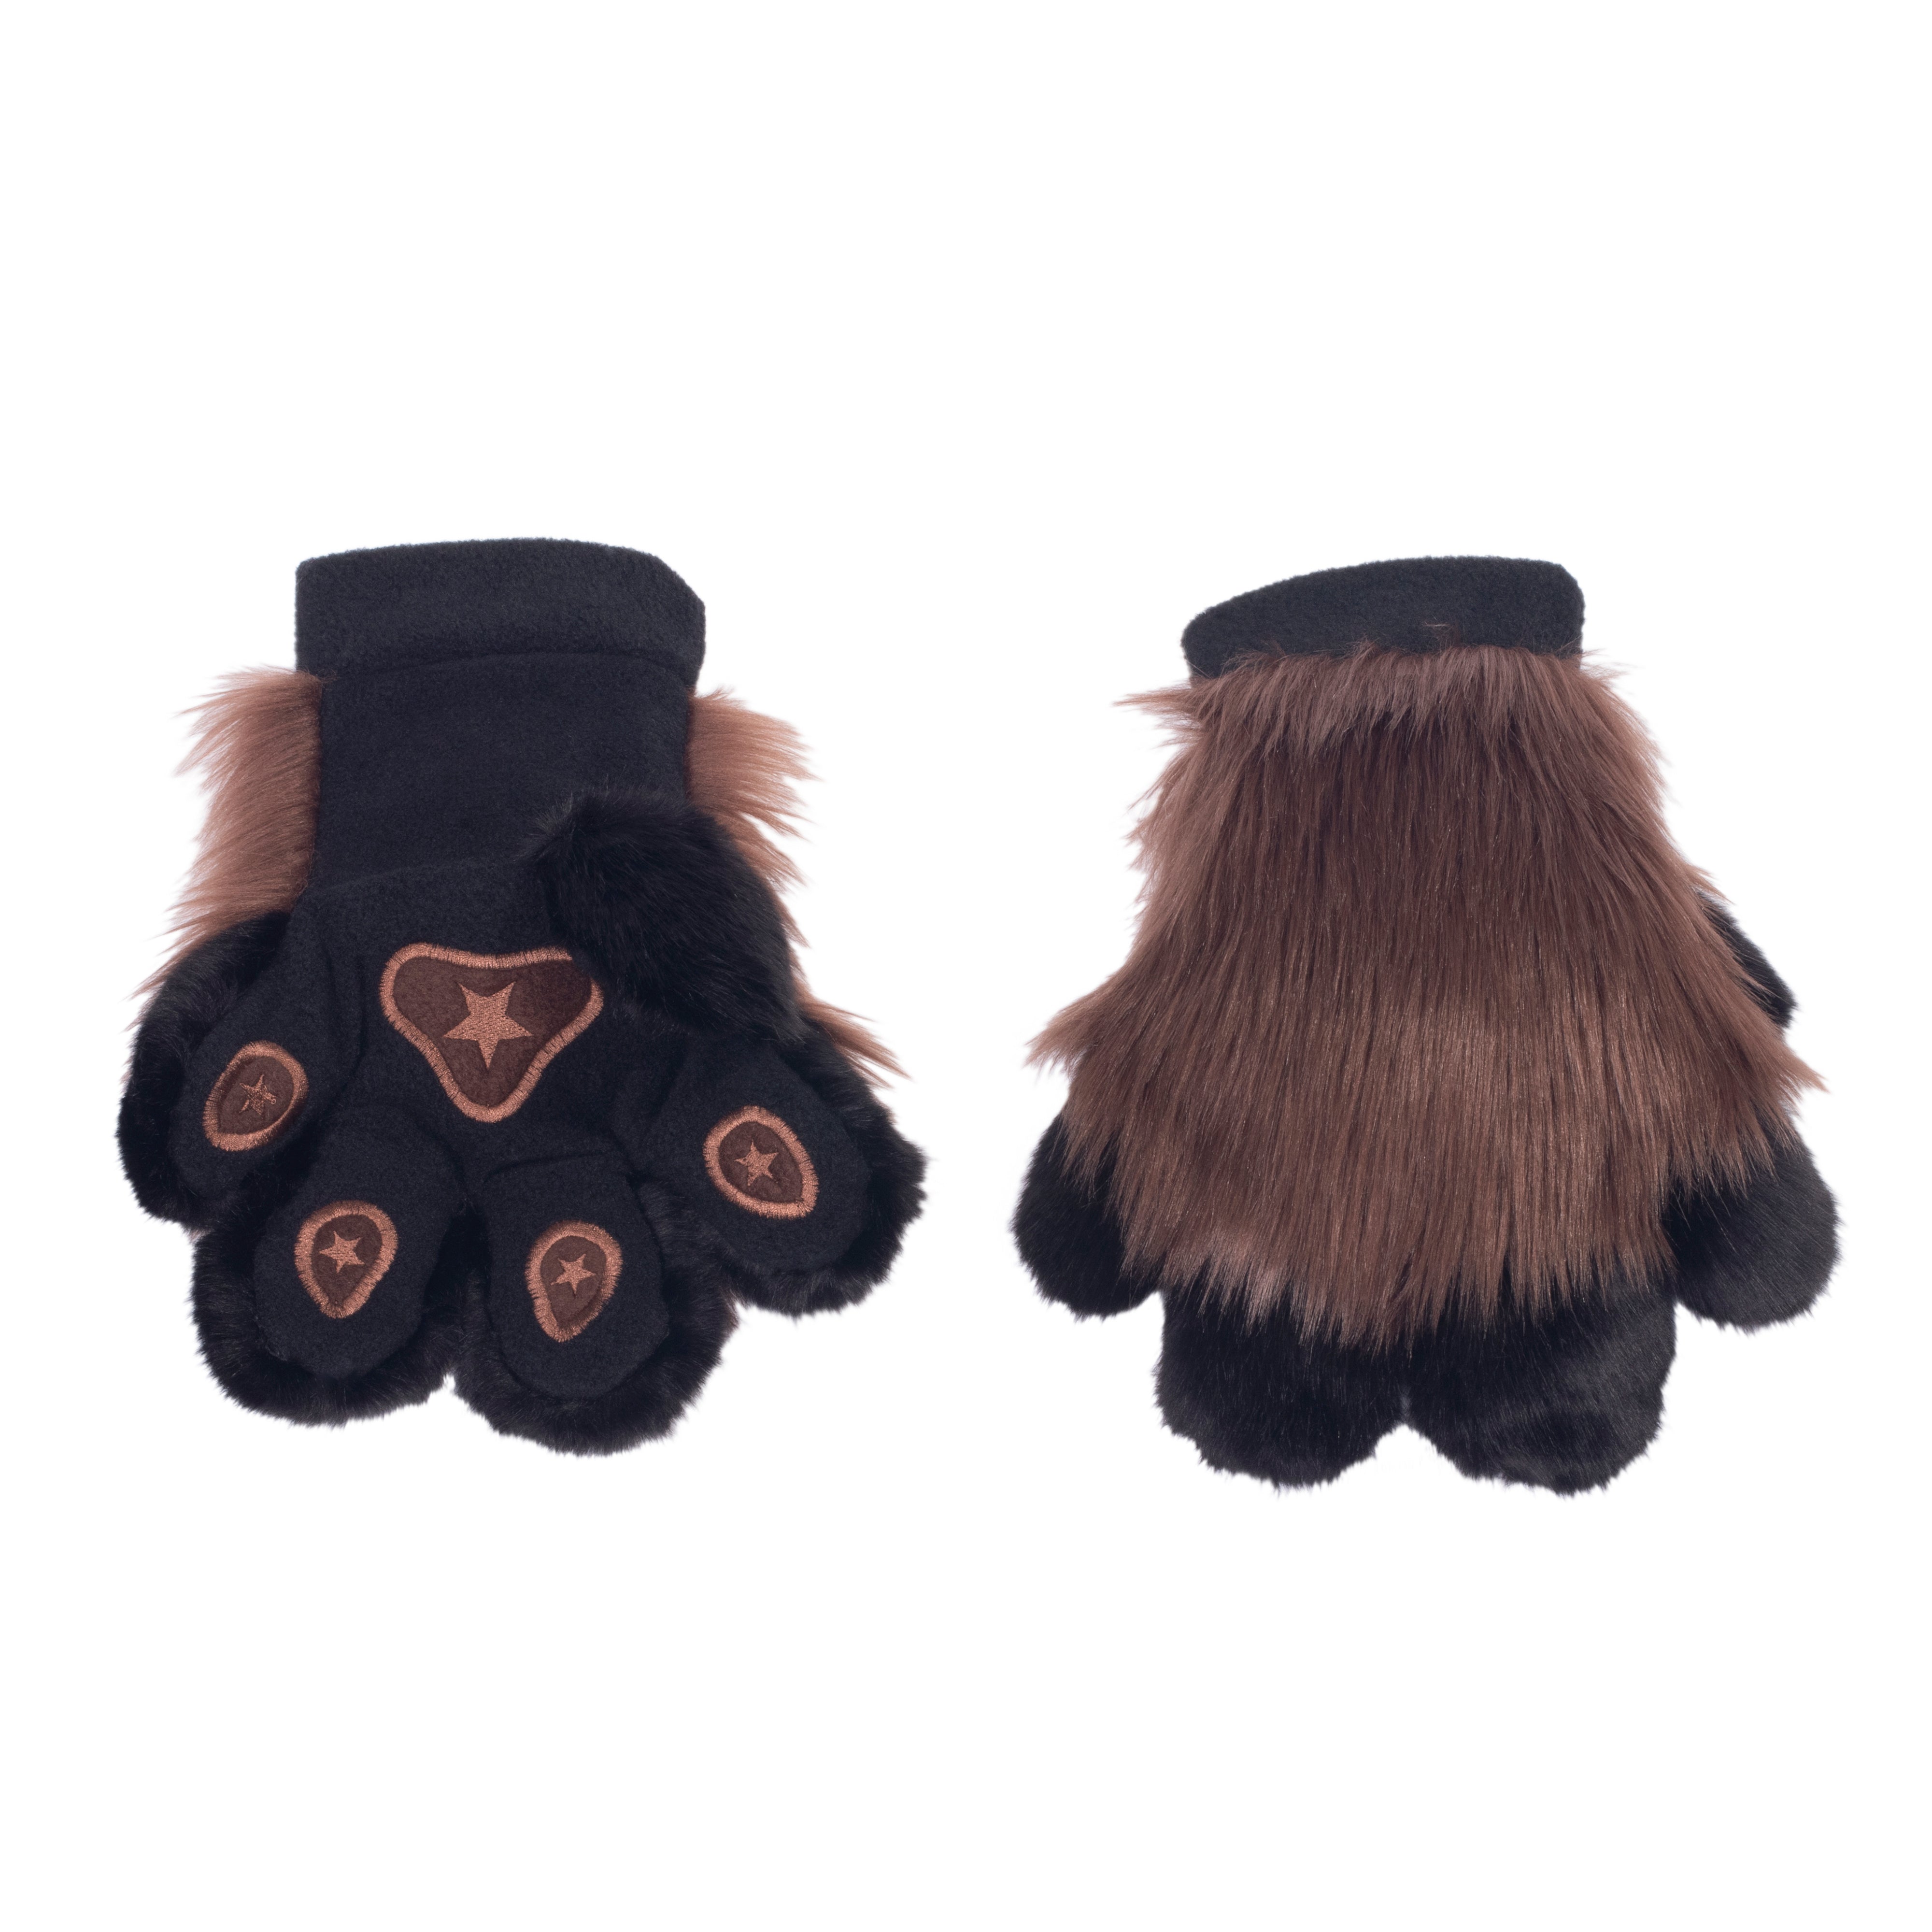 brown Pawstar furry fluffy fursuit partial hand paw gloves. Made from faux fur. Perfect for furries, cosplayers, and hallowee.